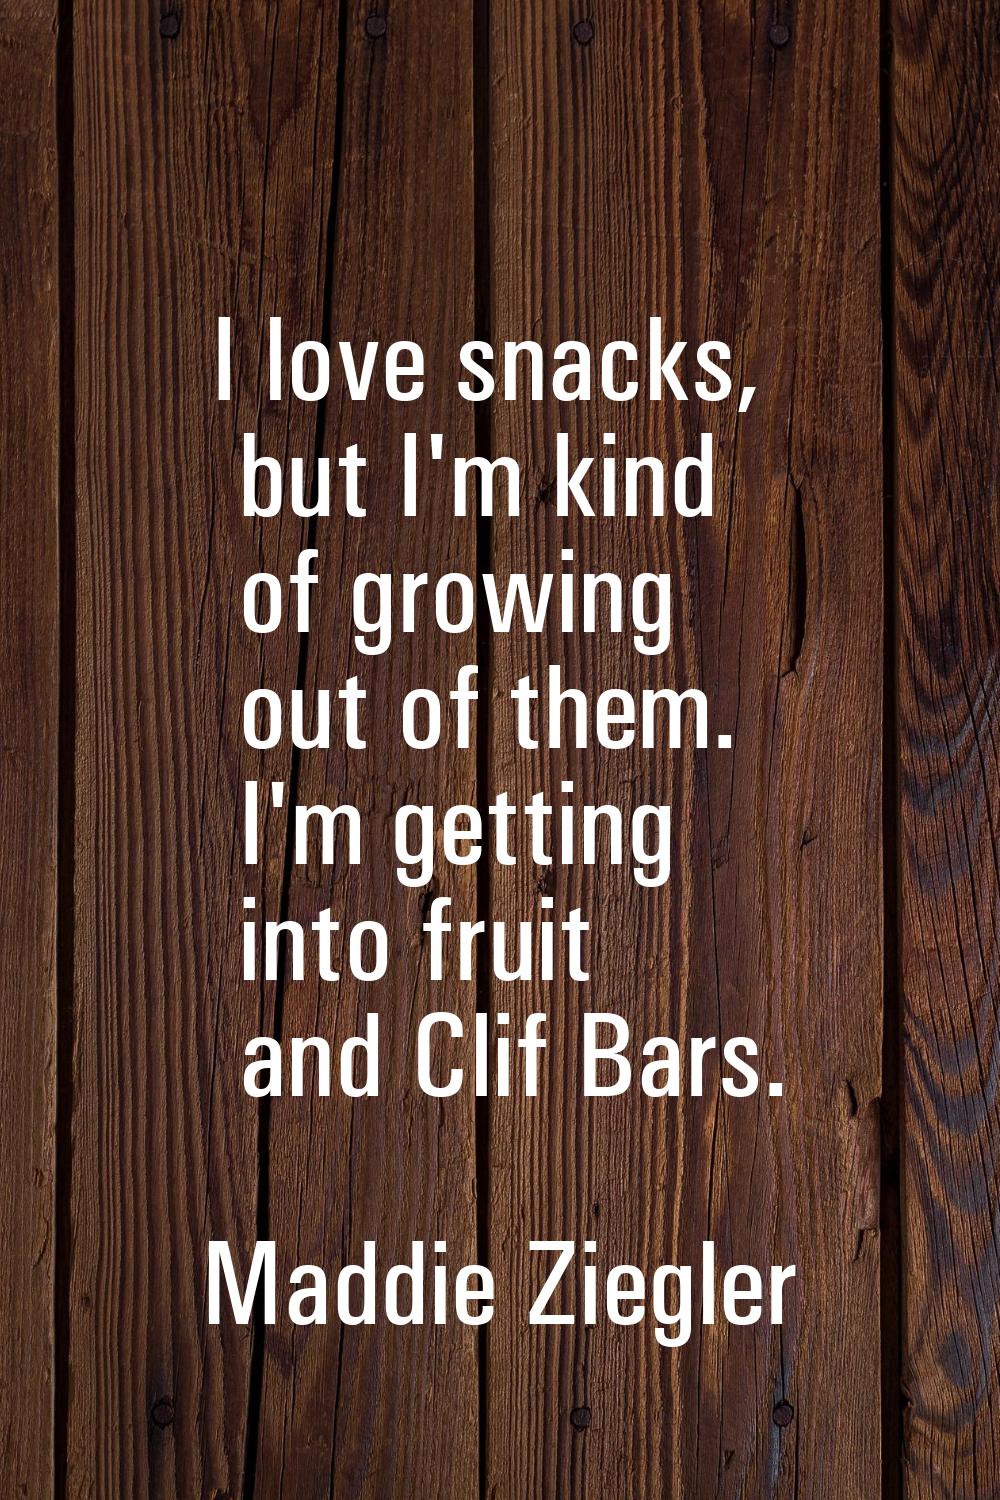 I love snacks, but I'm kind of growing out of them. I'm getting into fruit and Clif Bars.